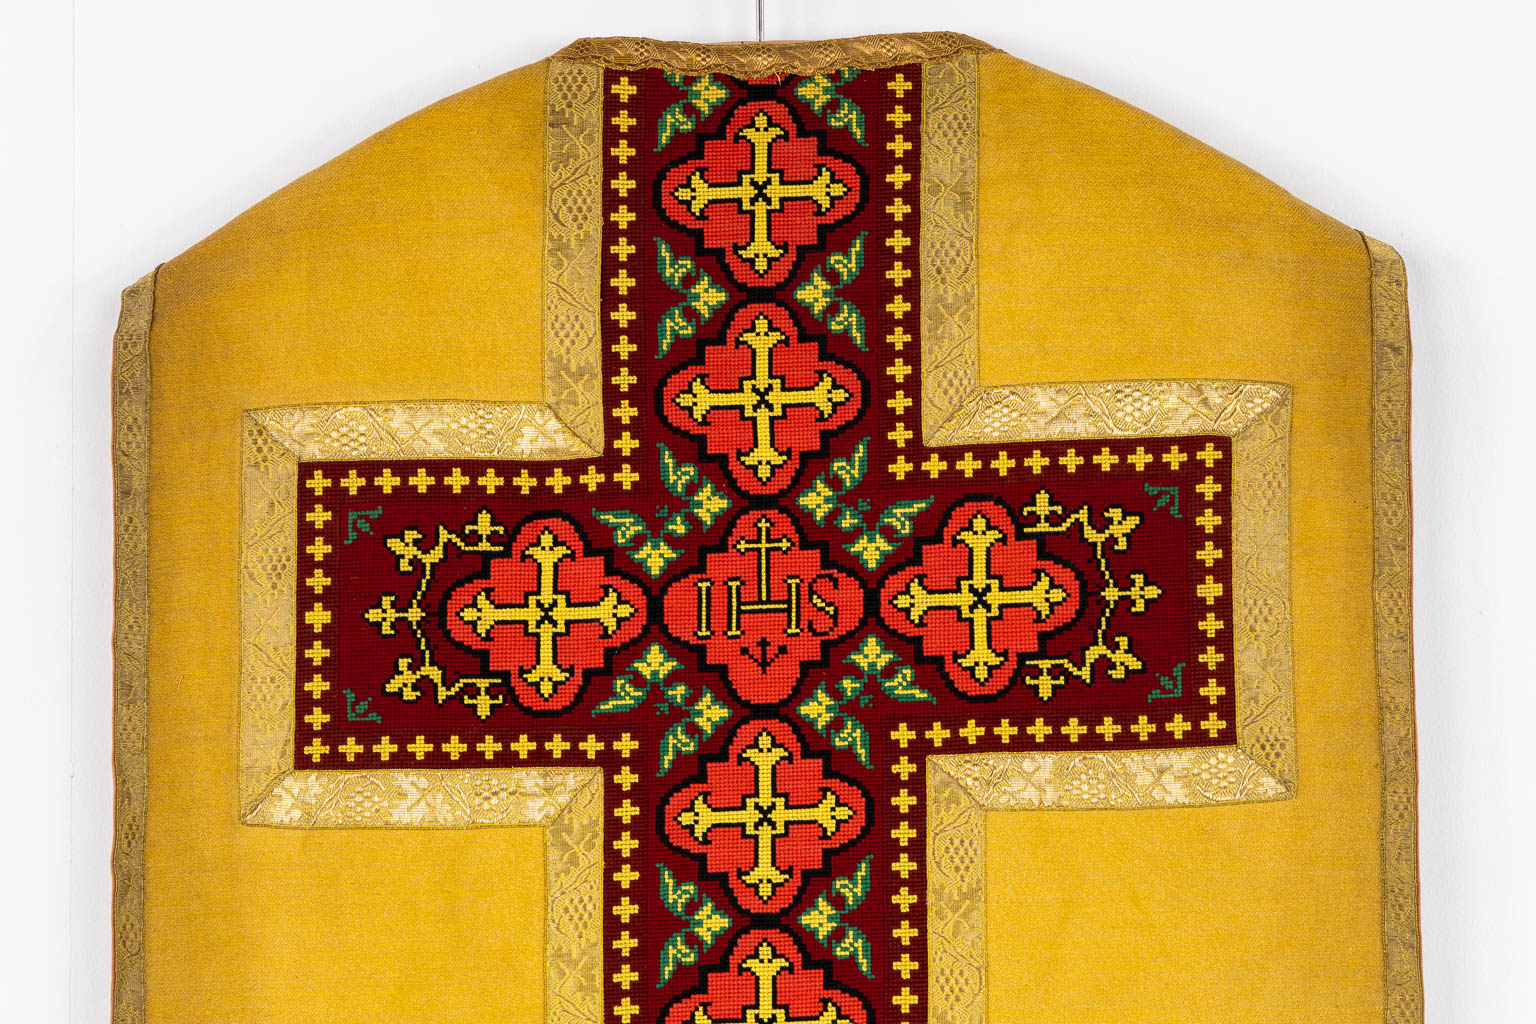 A Humeral Veil and Four Roman Chasubles, embroideries with an IHS and floral decor. 